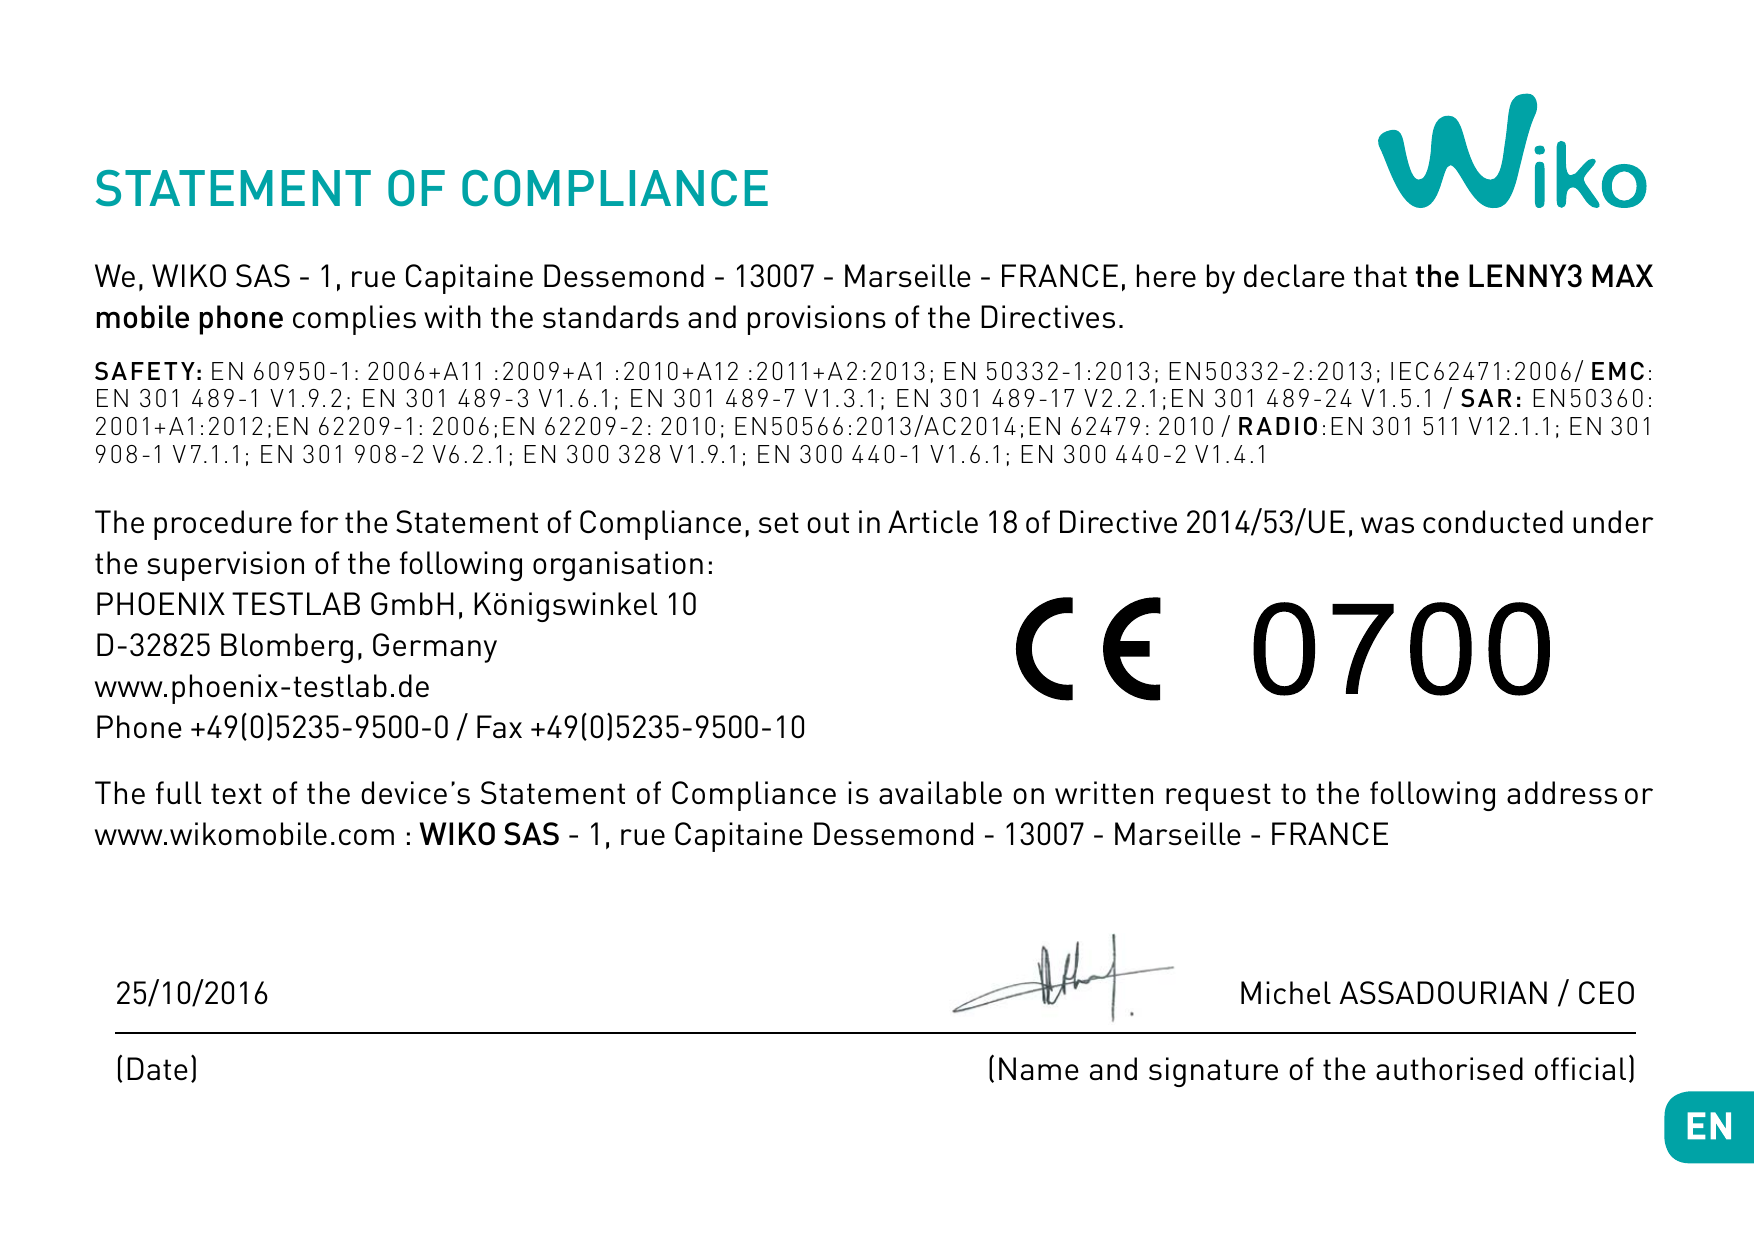 STATEMENT OF COMPLIANCEWe, WIKO SAS - 1, rue Capitaine Dessemond - 13007 - Marseille - FRANCE, here by declare that the LENNY3 M